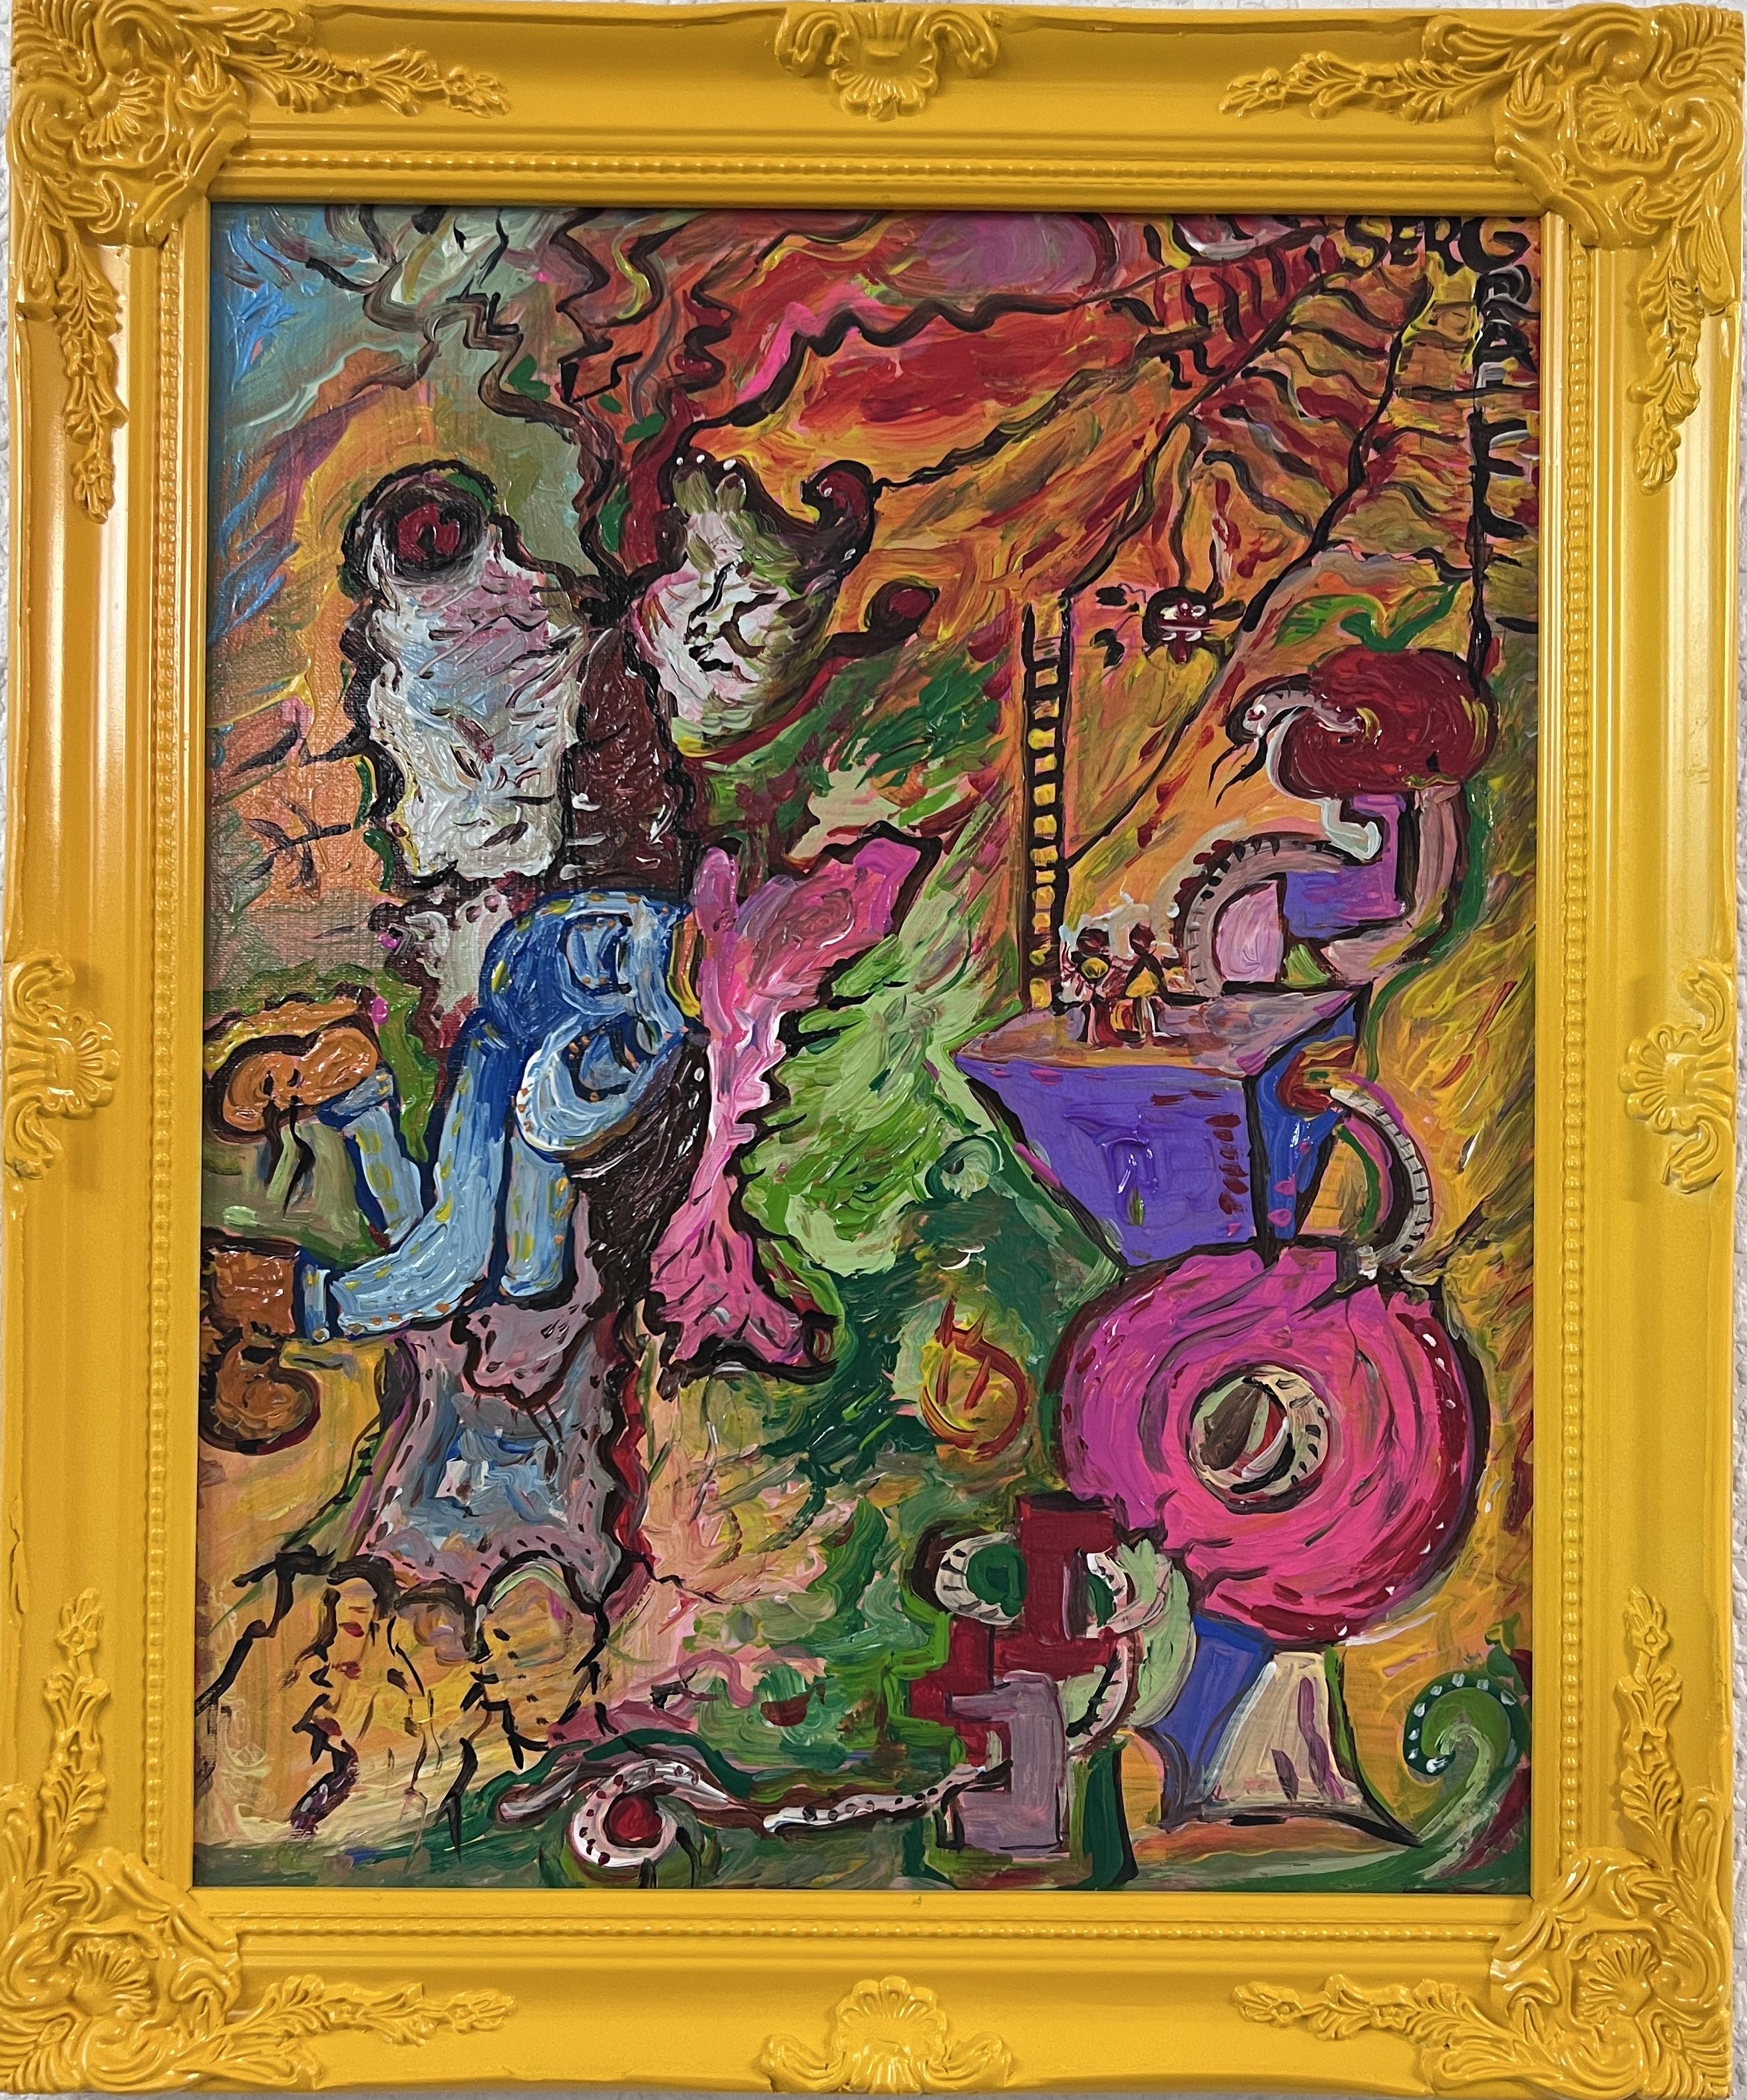 This is a unique original acrylic/oil painting on canvas in a fantasy abstract style by Serg Graff Titled "Jump into the Painting № 1". 
It comes signed, dated, and with a COA (Certificate of Authenticity). 

Presented in an exclusive yellow frame.